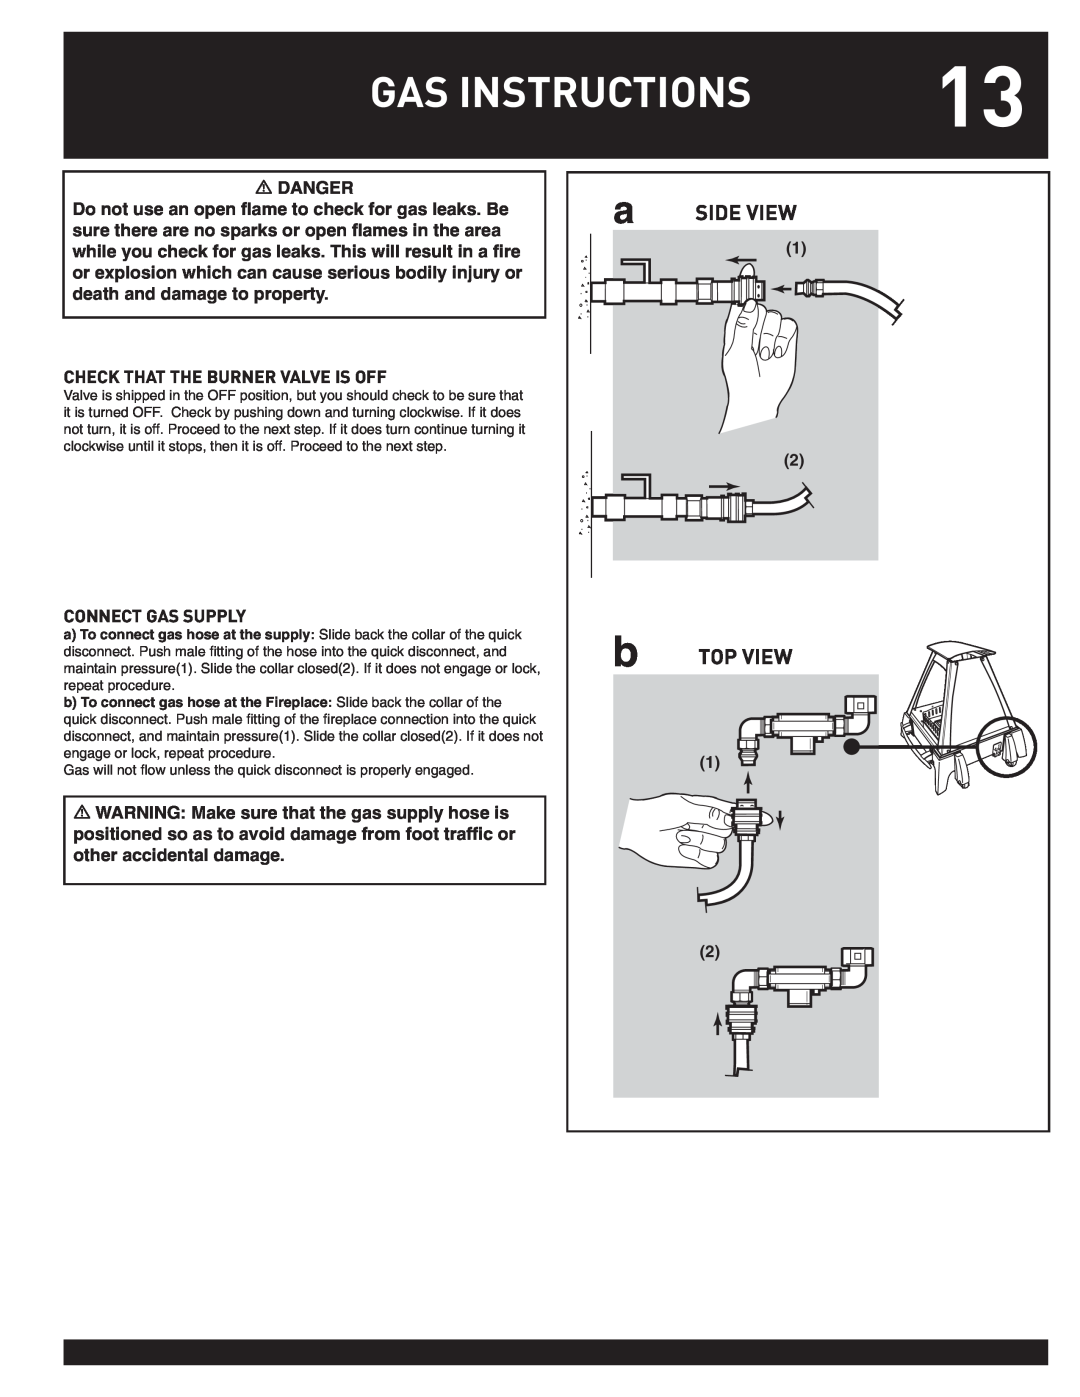 Weber FLAME manual Gas Instructions 